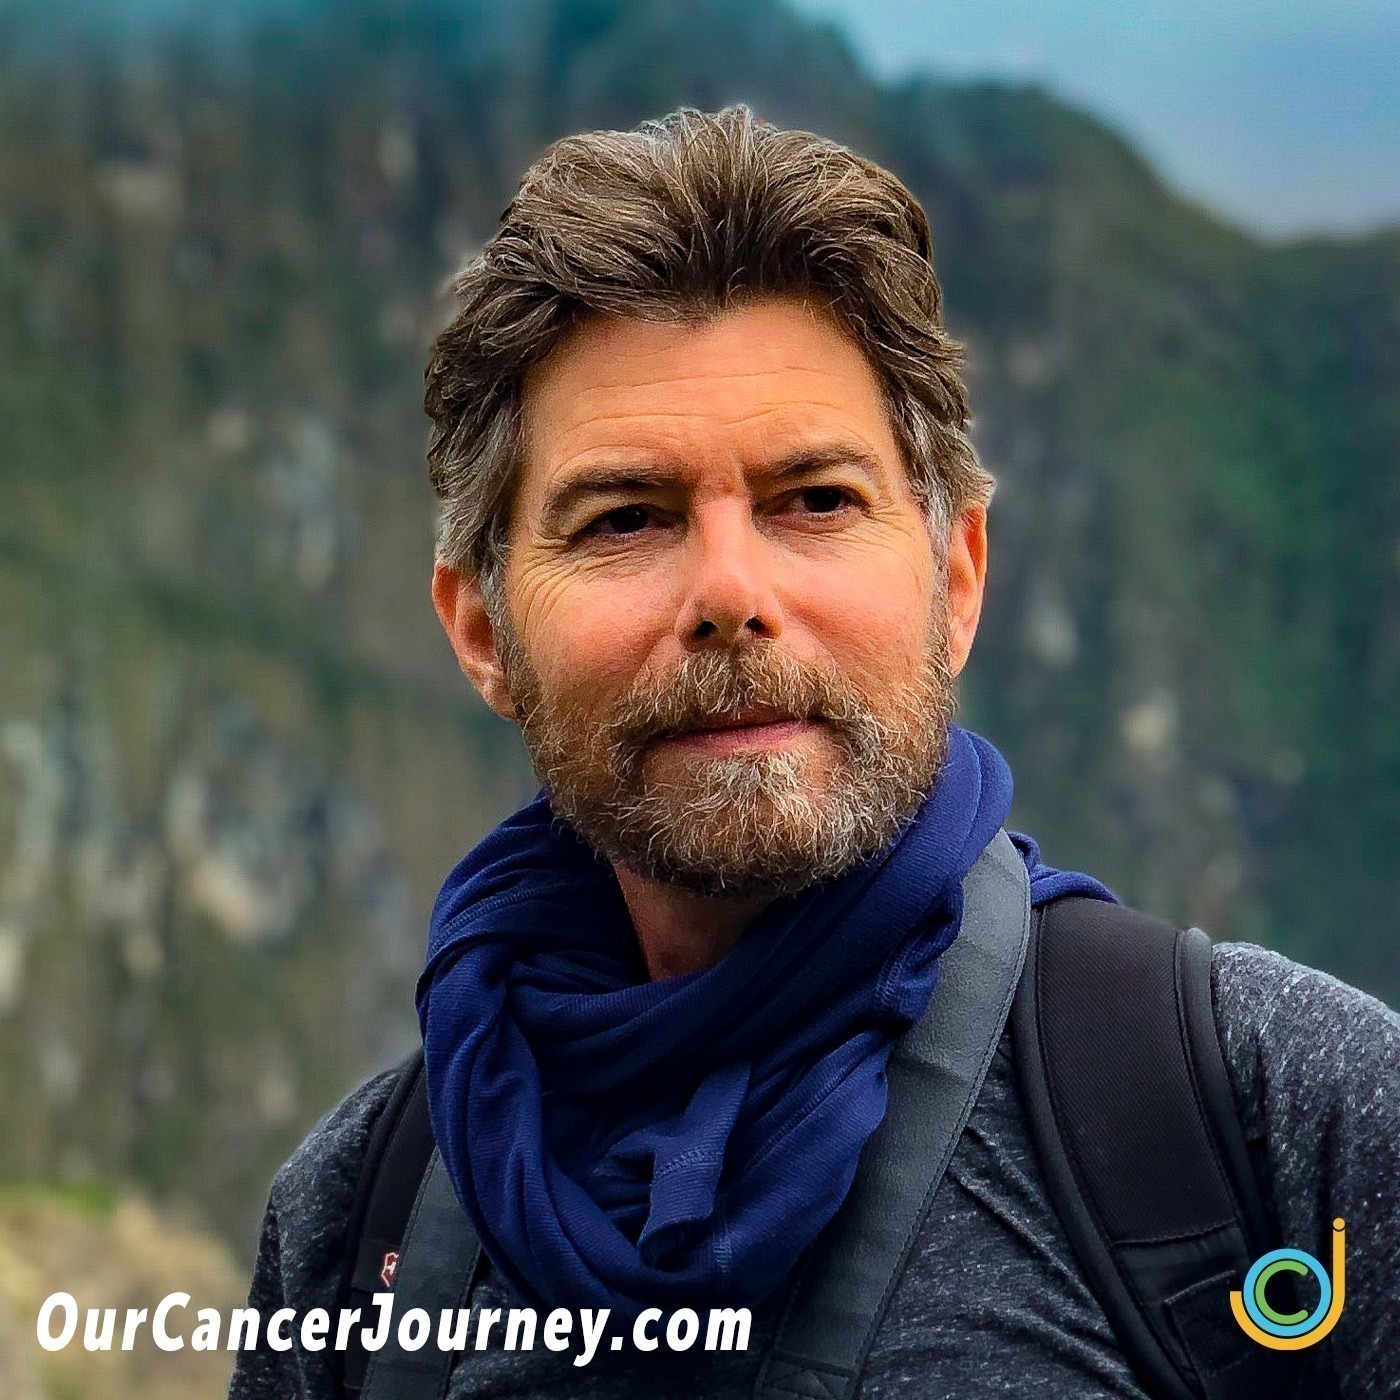 #024 – Update & Leaving for Adventure During Cancer – Bruce Watkins